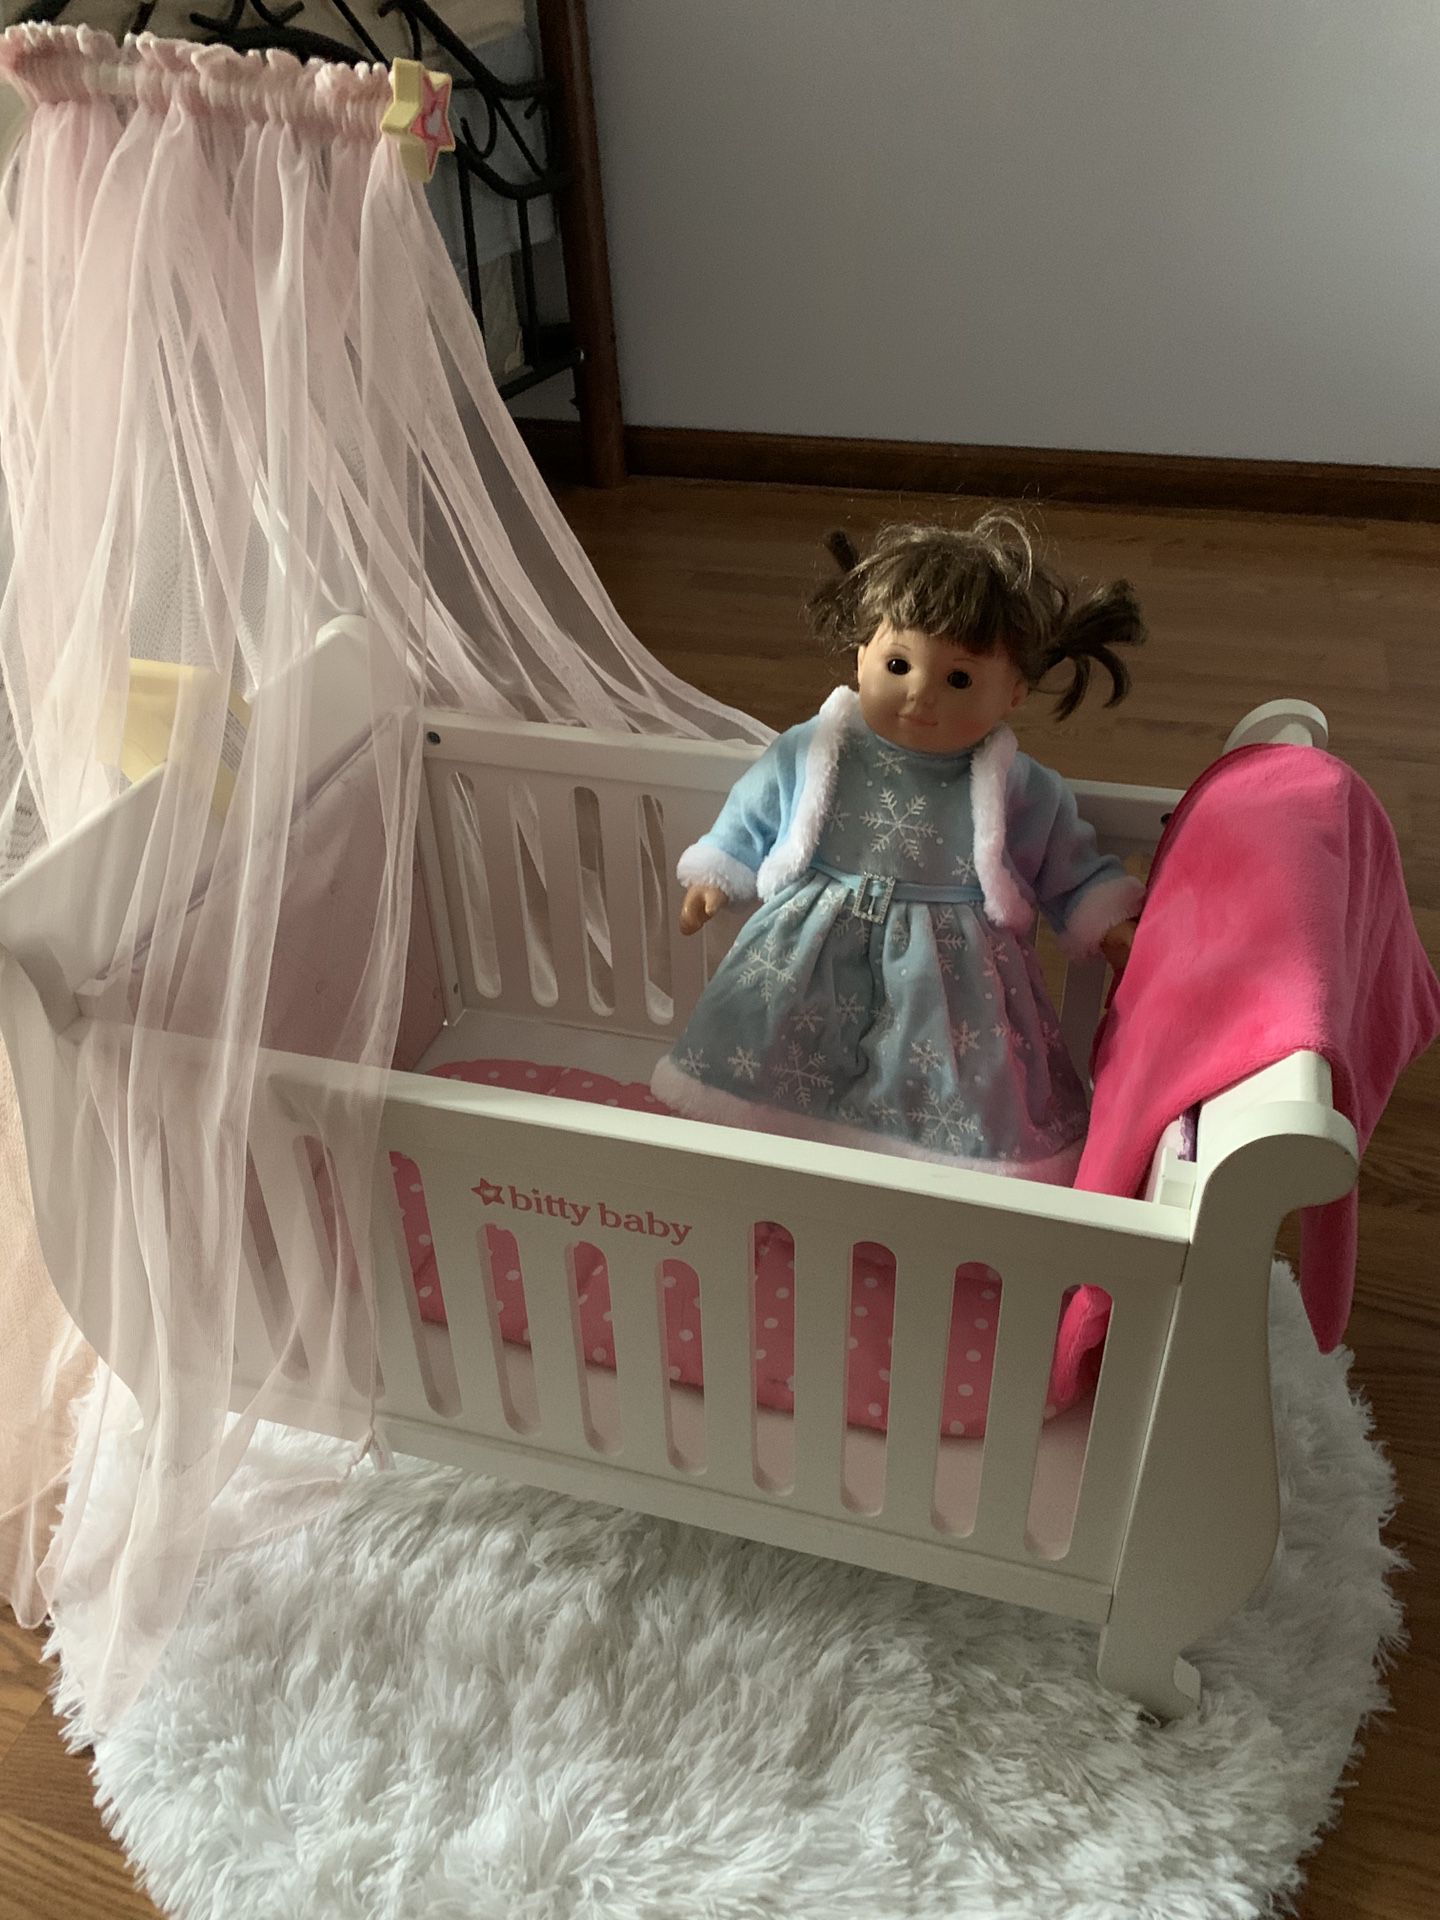 American Girl Doll With Bed, Stroller, Highchair And Closet Full Of Cloths